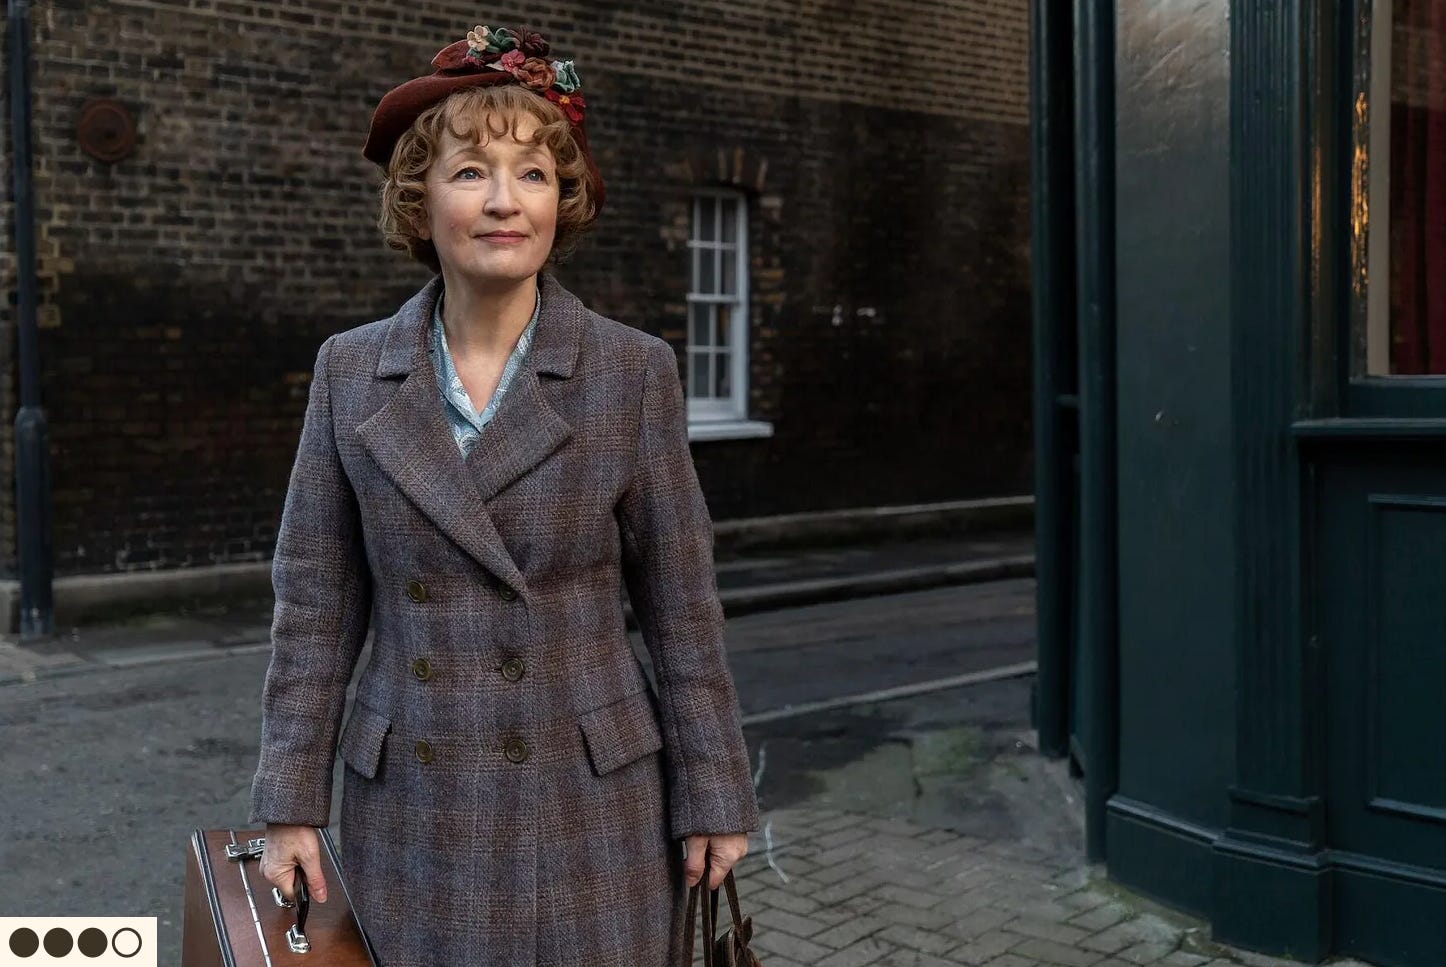 Lesley Manville in Mrs. Harris Goes to Parris (3/4)